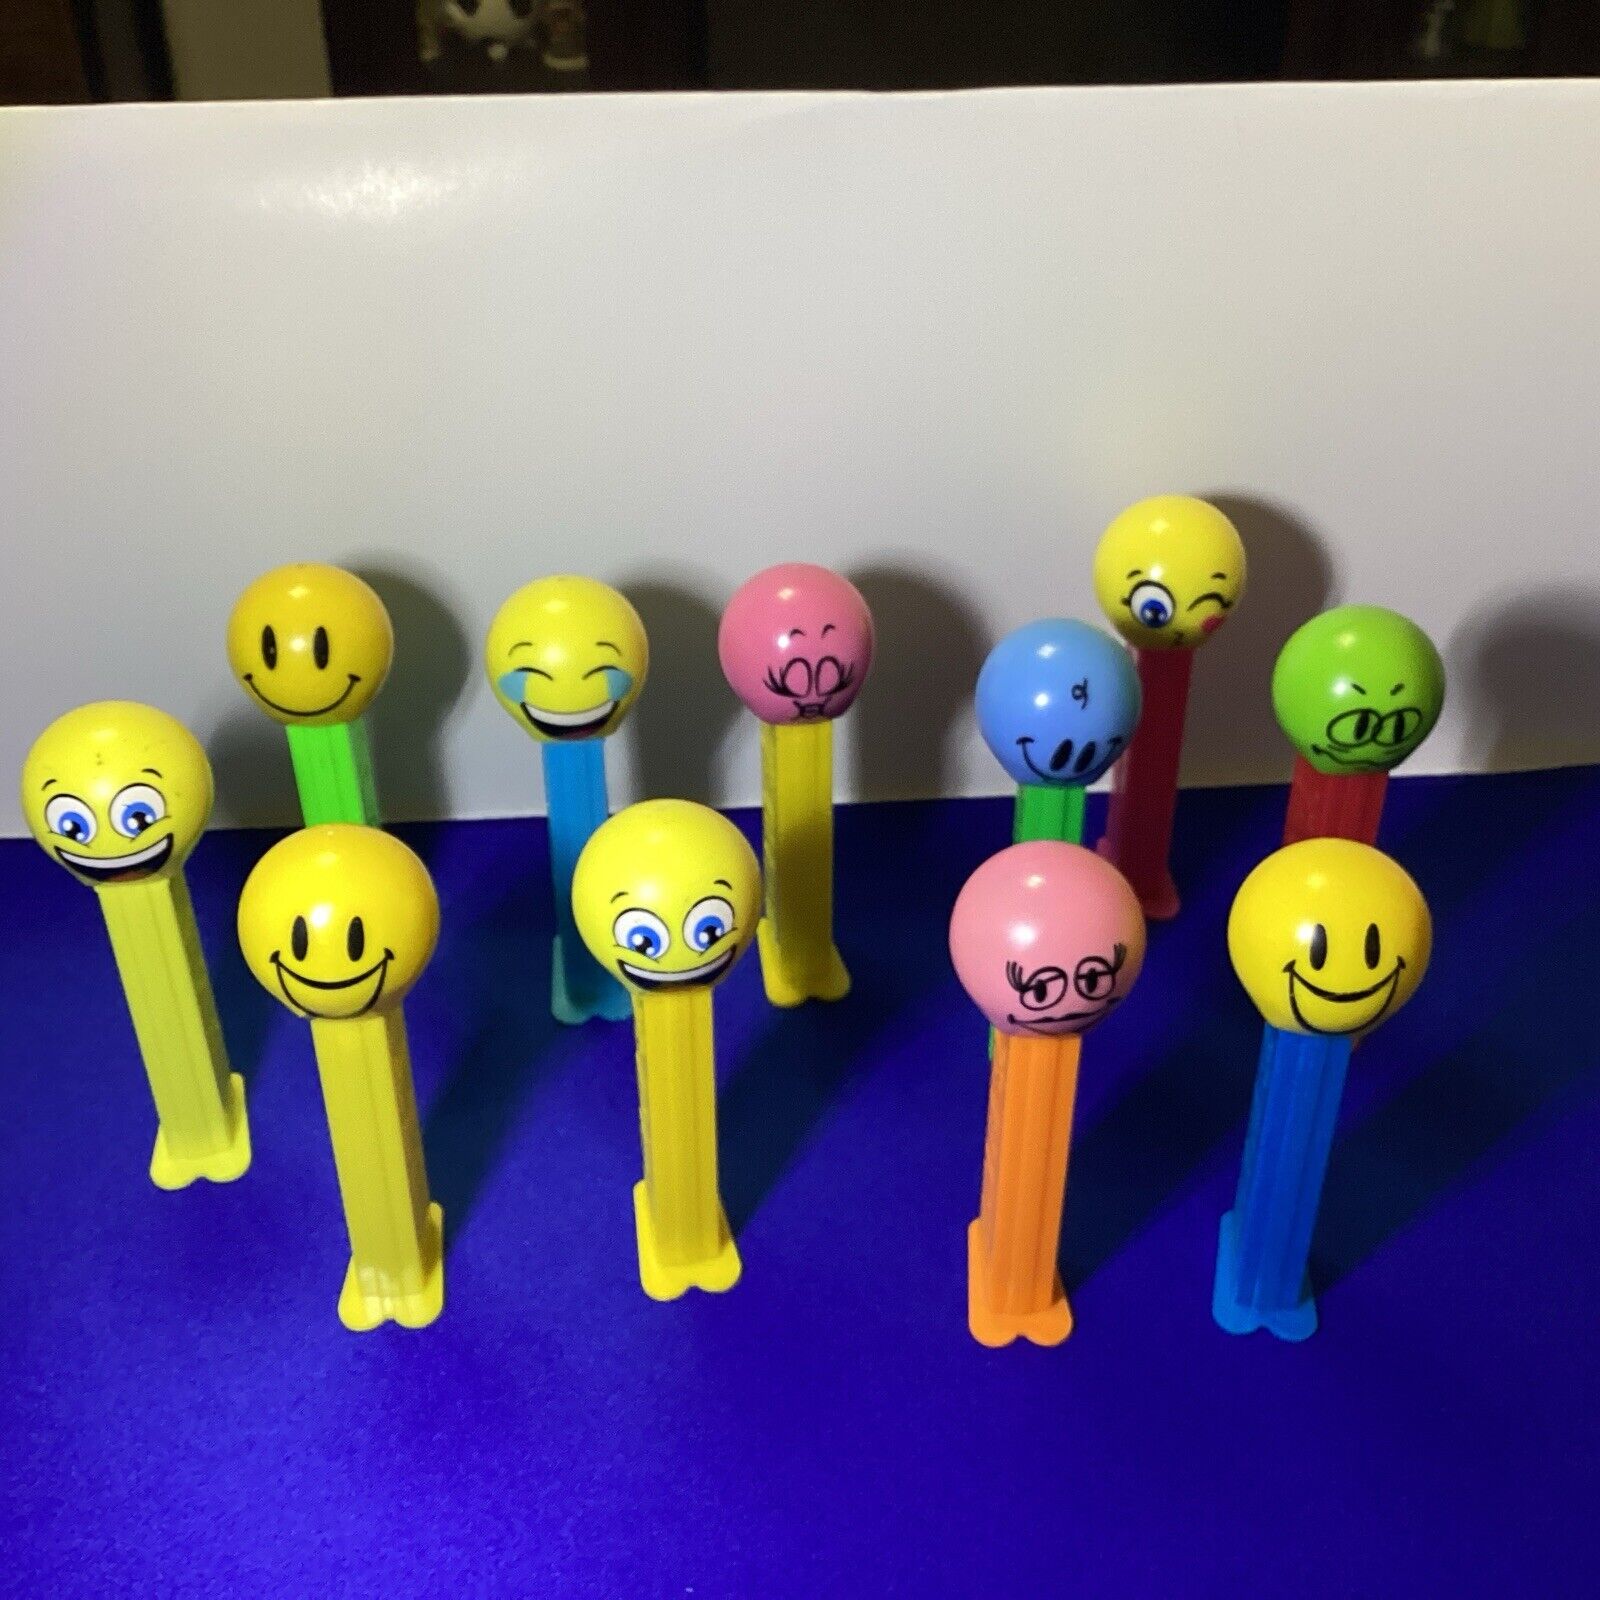 Vintage Lot Of 11 Emojis Pez Candy Dispensers Hungry, Slovenia 